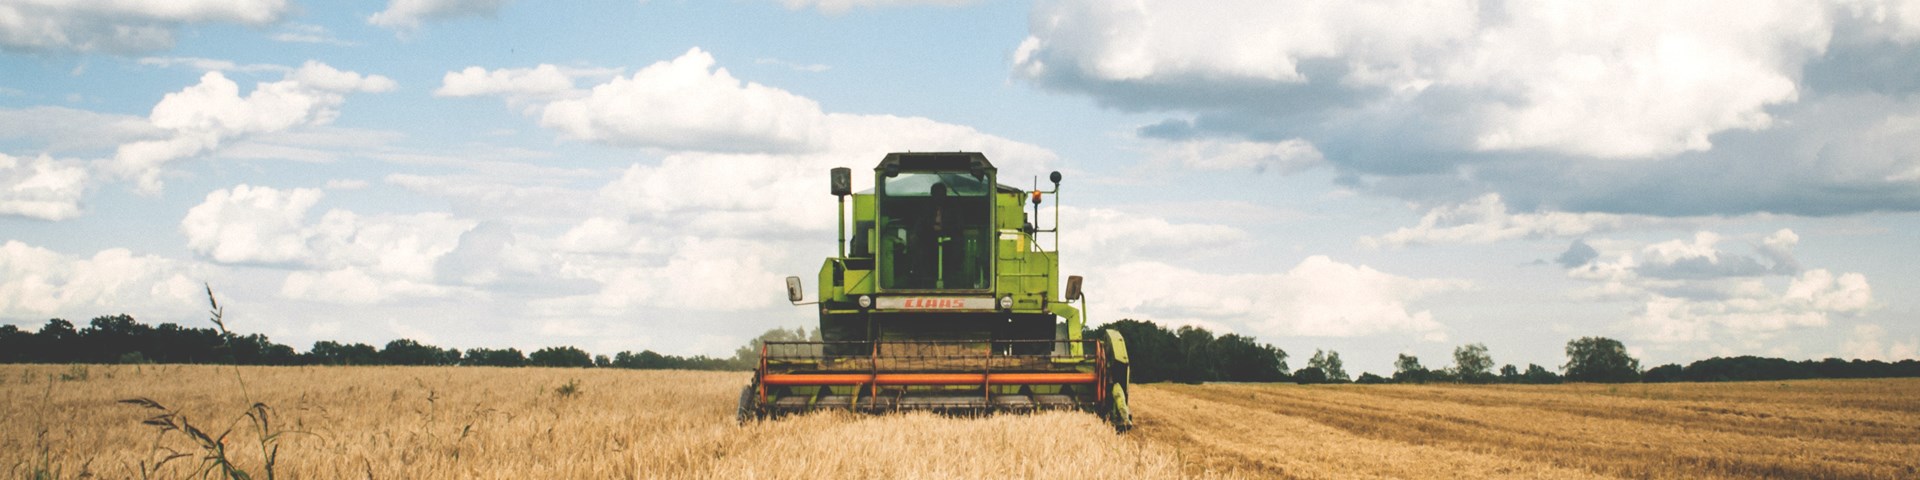 Combine harvester working in a wheat field covered by farm insurance